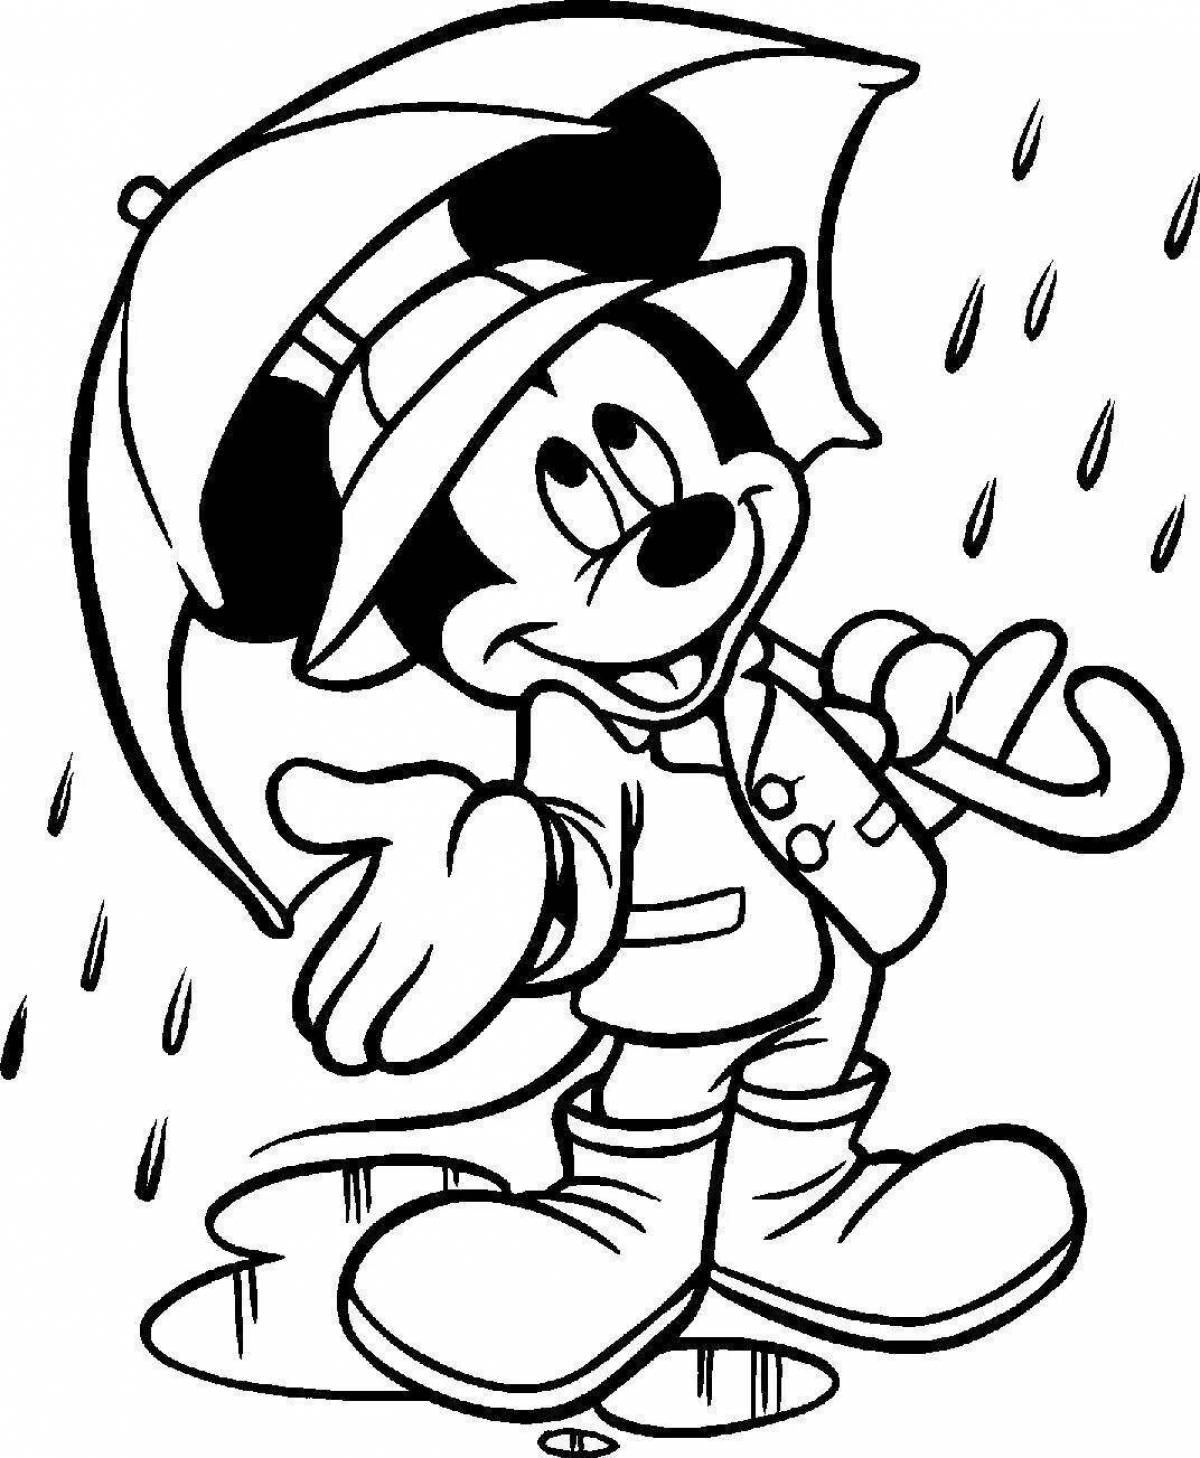 A fascinating cartoon character coloring page